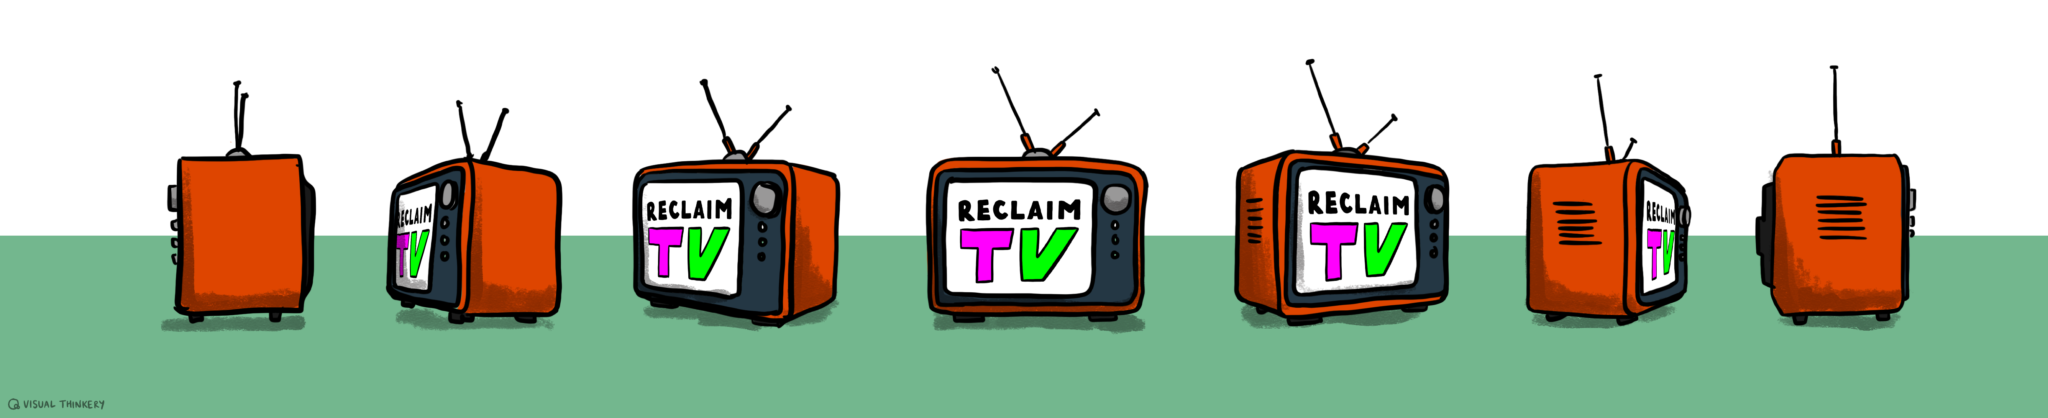 A series of TVs with Reclaim TV on the screens.